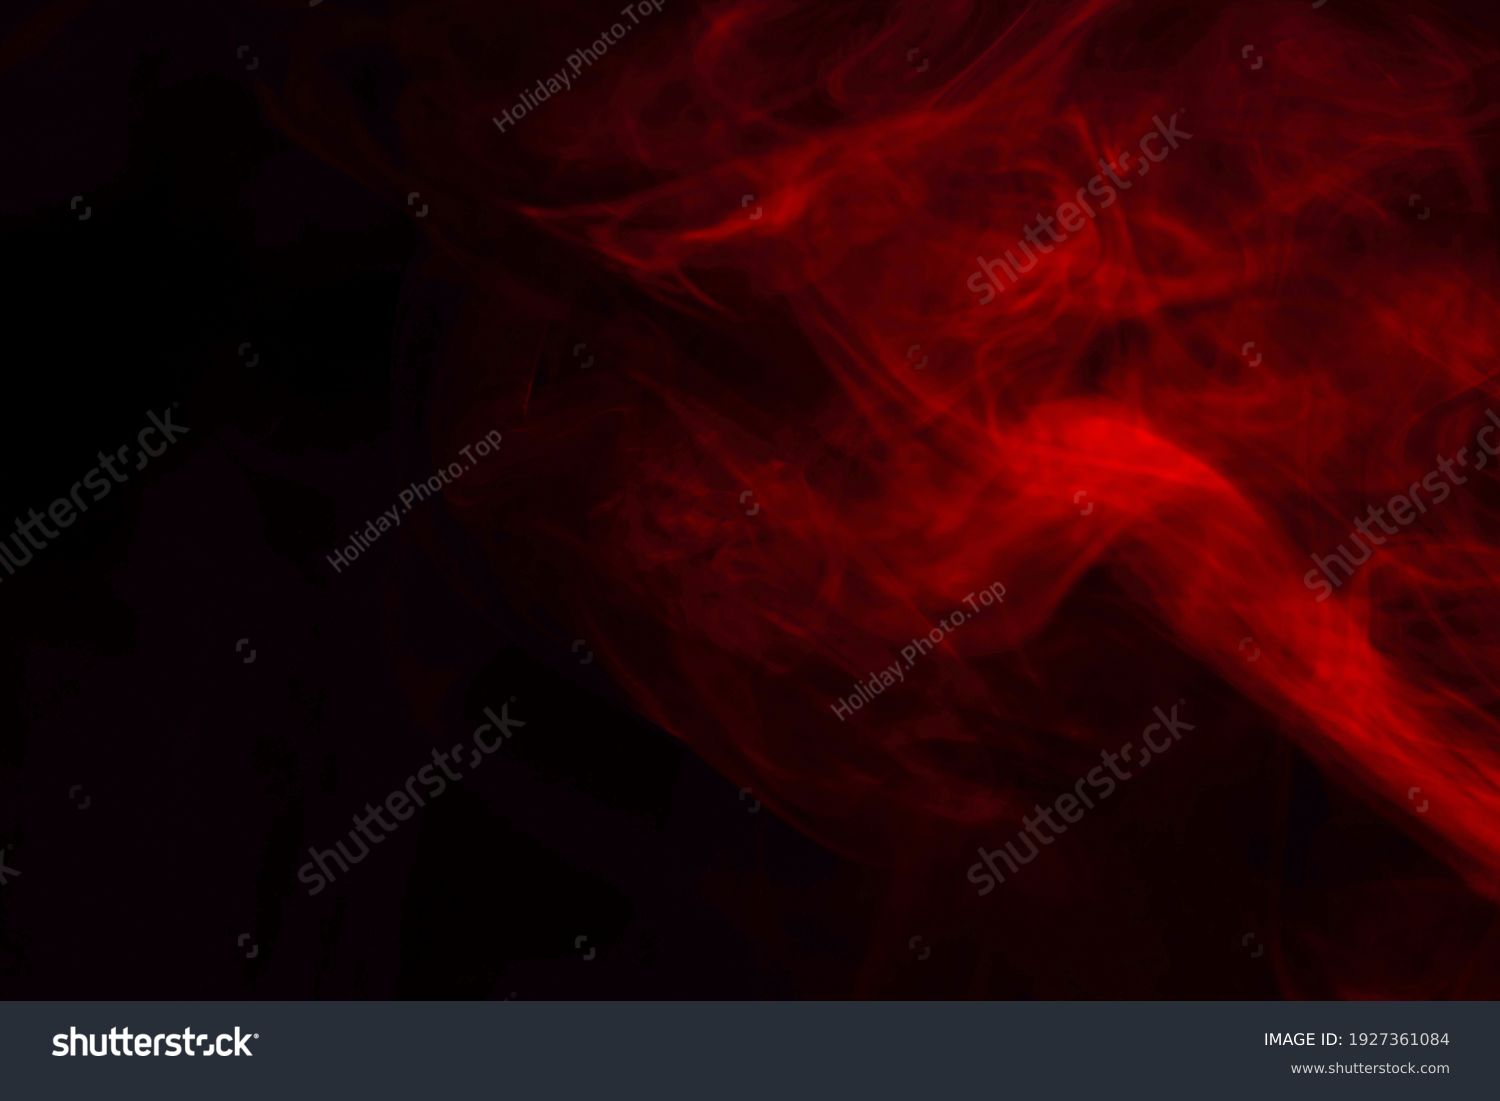 Red steam on a black background. Copy space. #1927361084